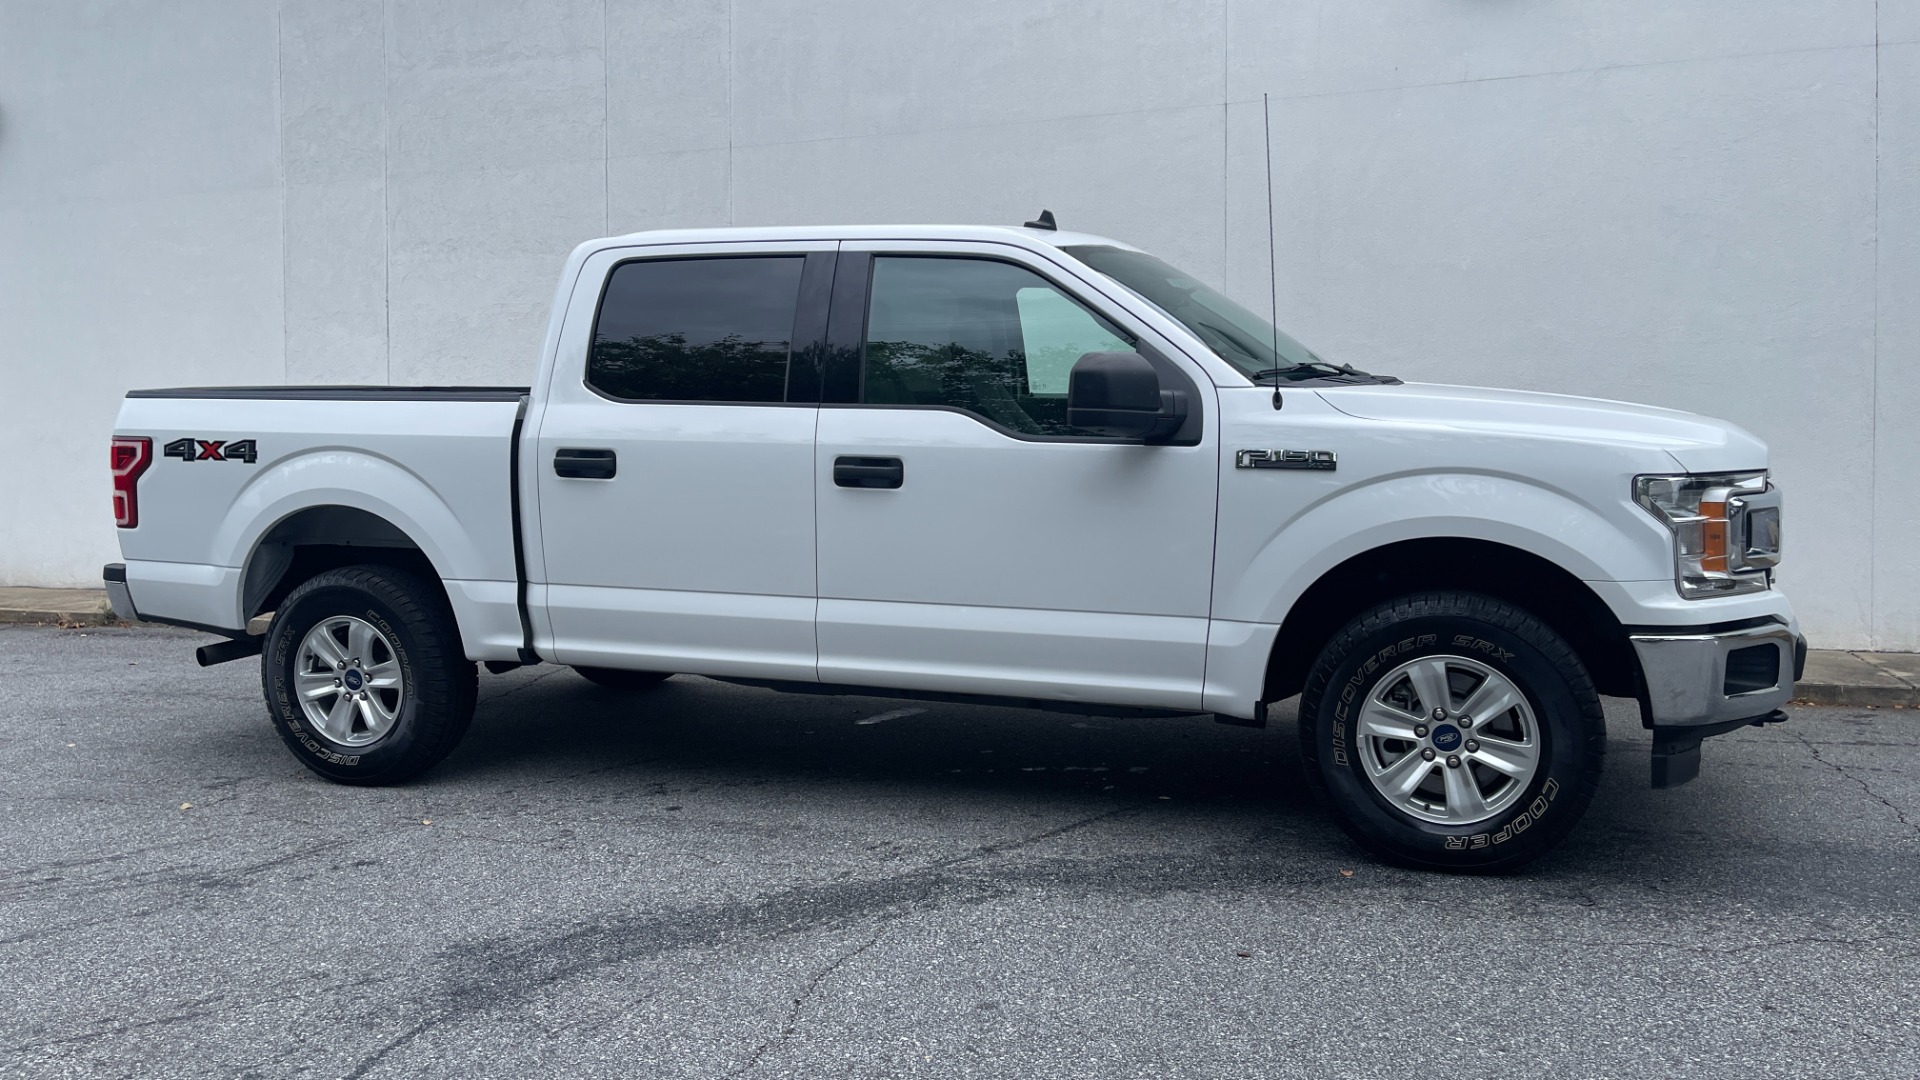 Used 2020 Ford F-150 XLT / 5.0L V8 / CREW CAB 4X4 / 17IN ALUMINUM WHEELS / CLOTH SEATS for sale $43,995 at Formula Imports in Charlotte NC 28227 4